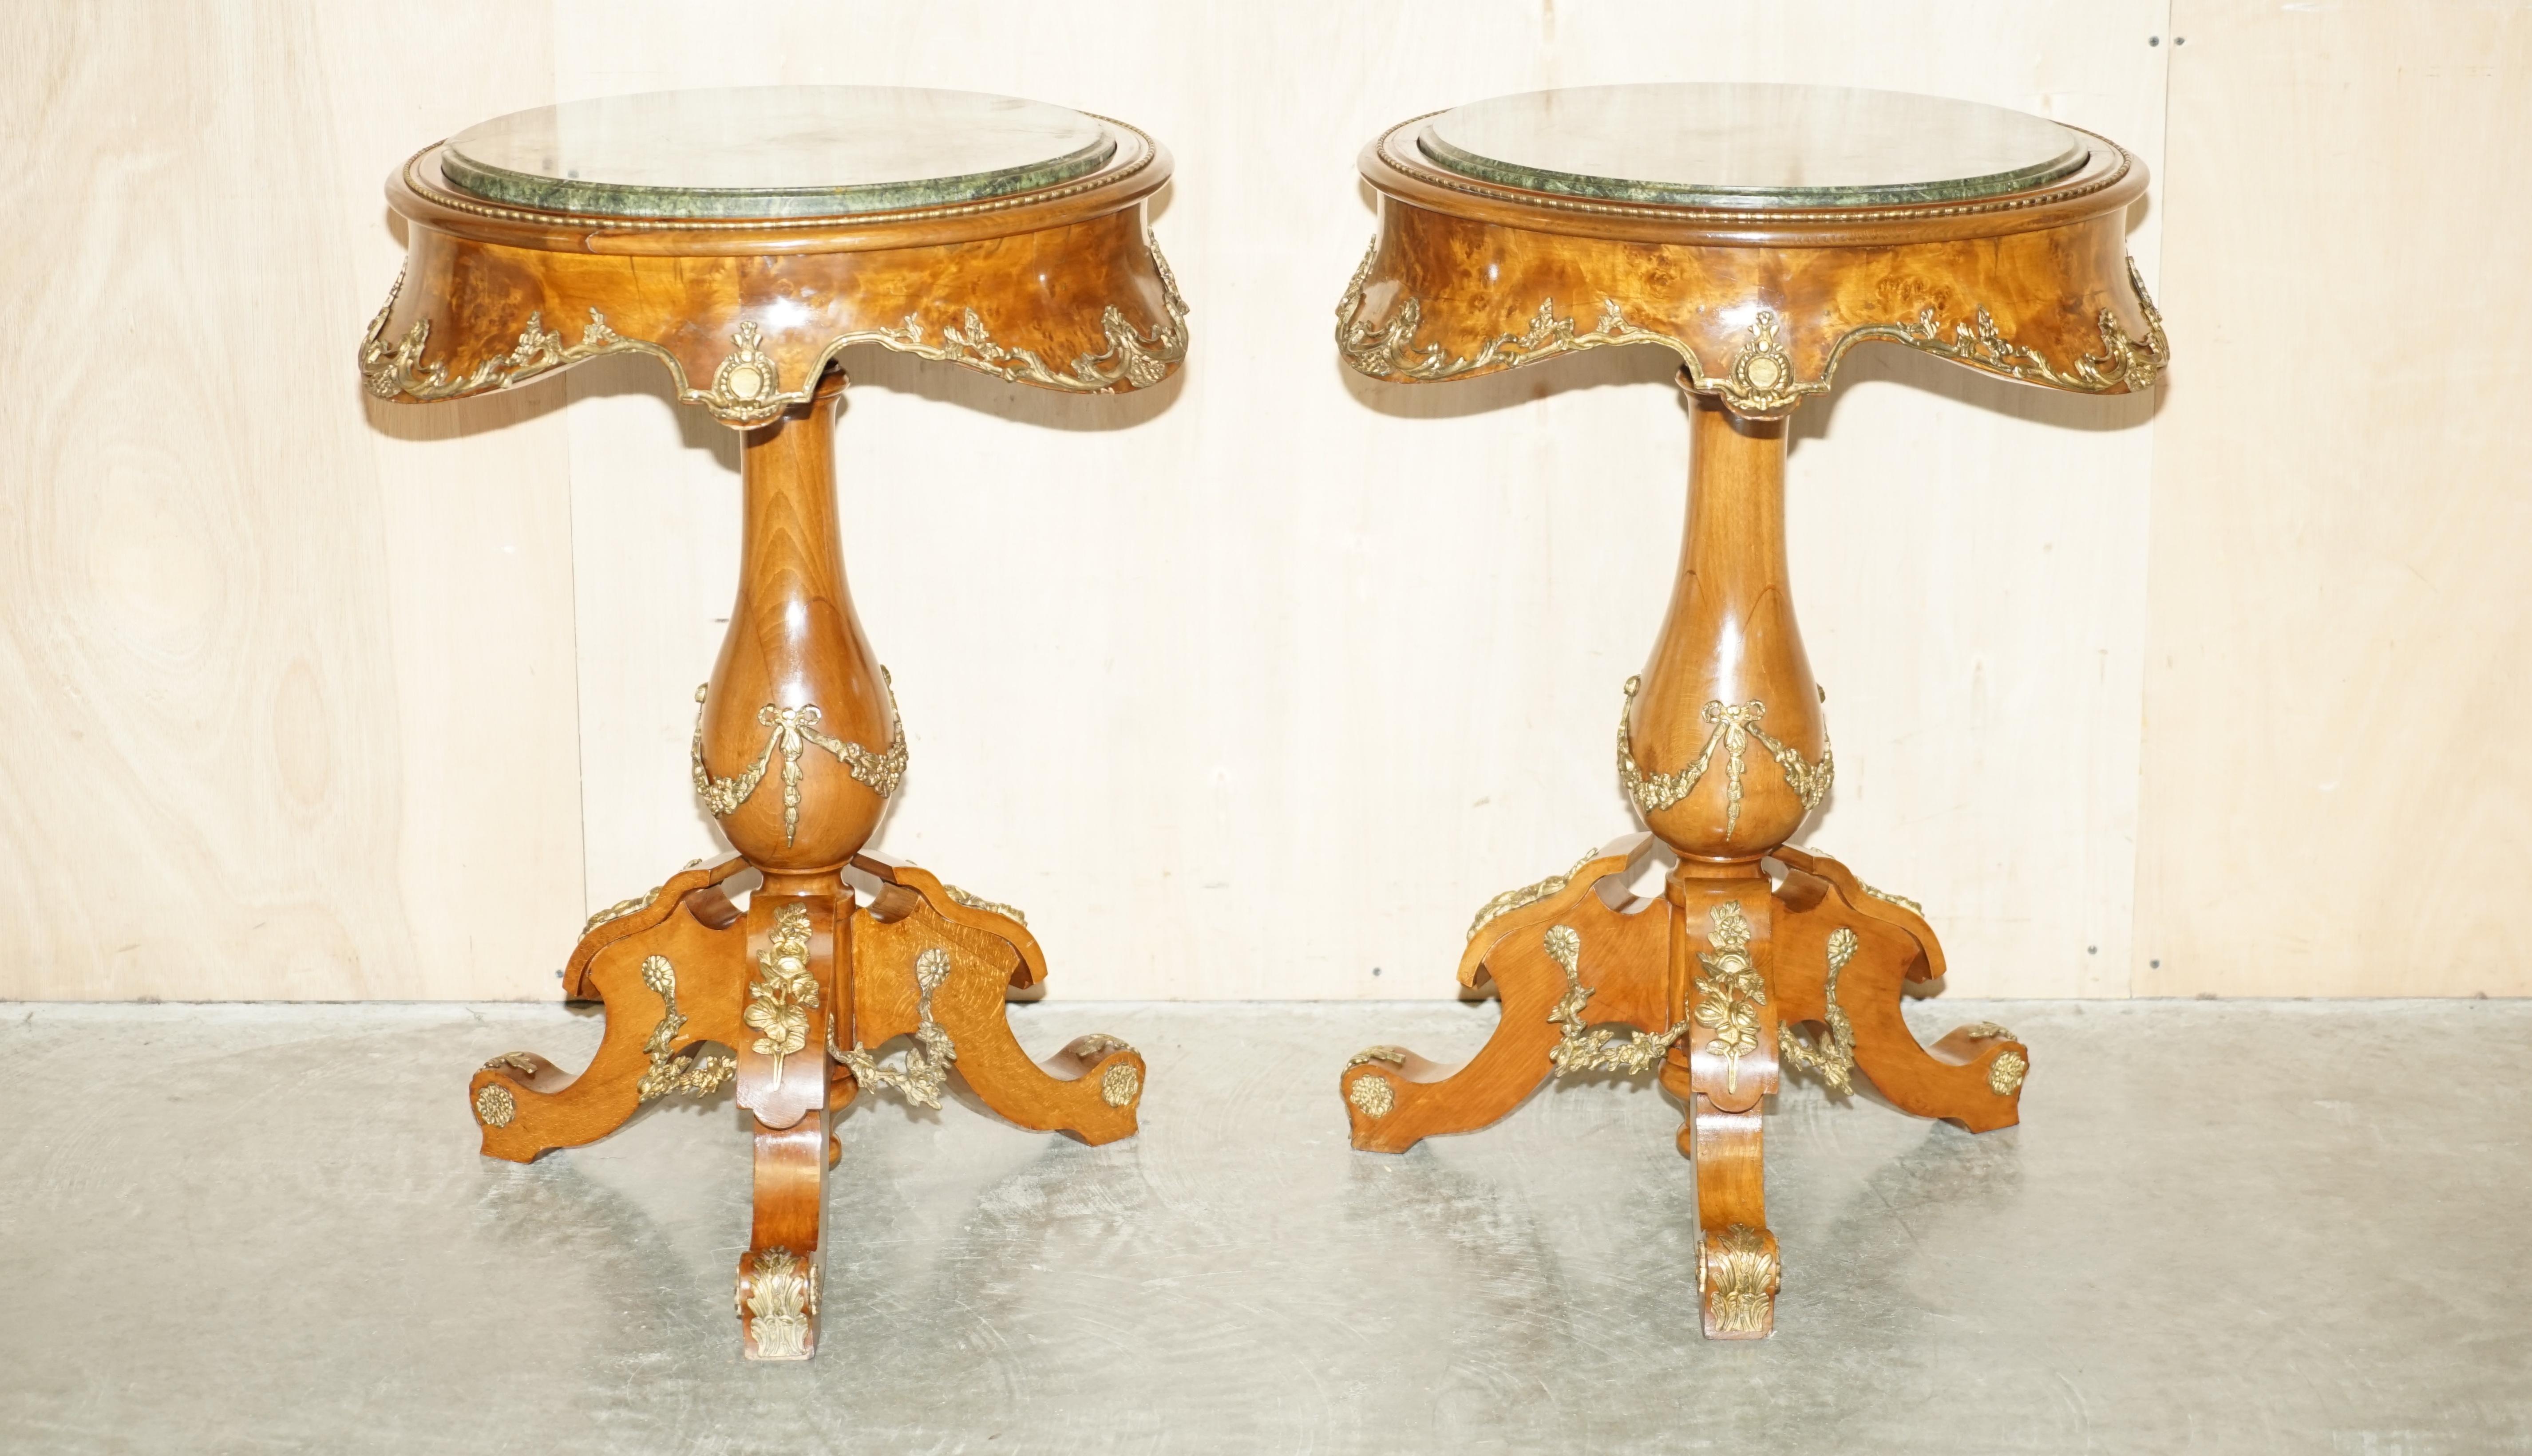 Royal House Antiques is delighted to offer for sale this exquisite pair of circa 1880 French Burr Walnut with ornate Gilt Brass detailing and Italian Green Marble topped, occasional side end or lamp tables 

A very good looking well-made and